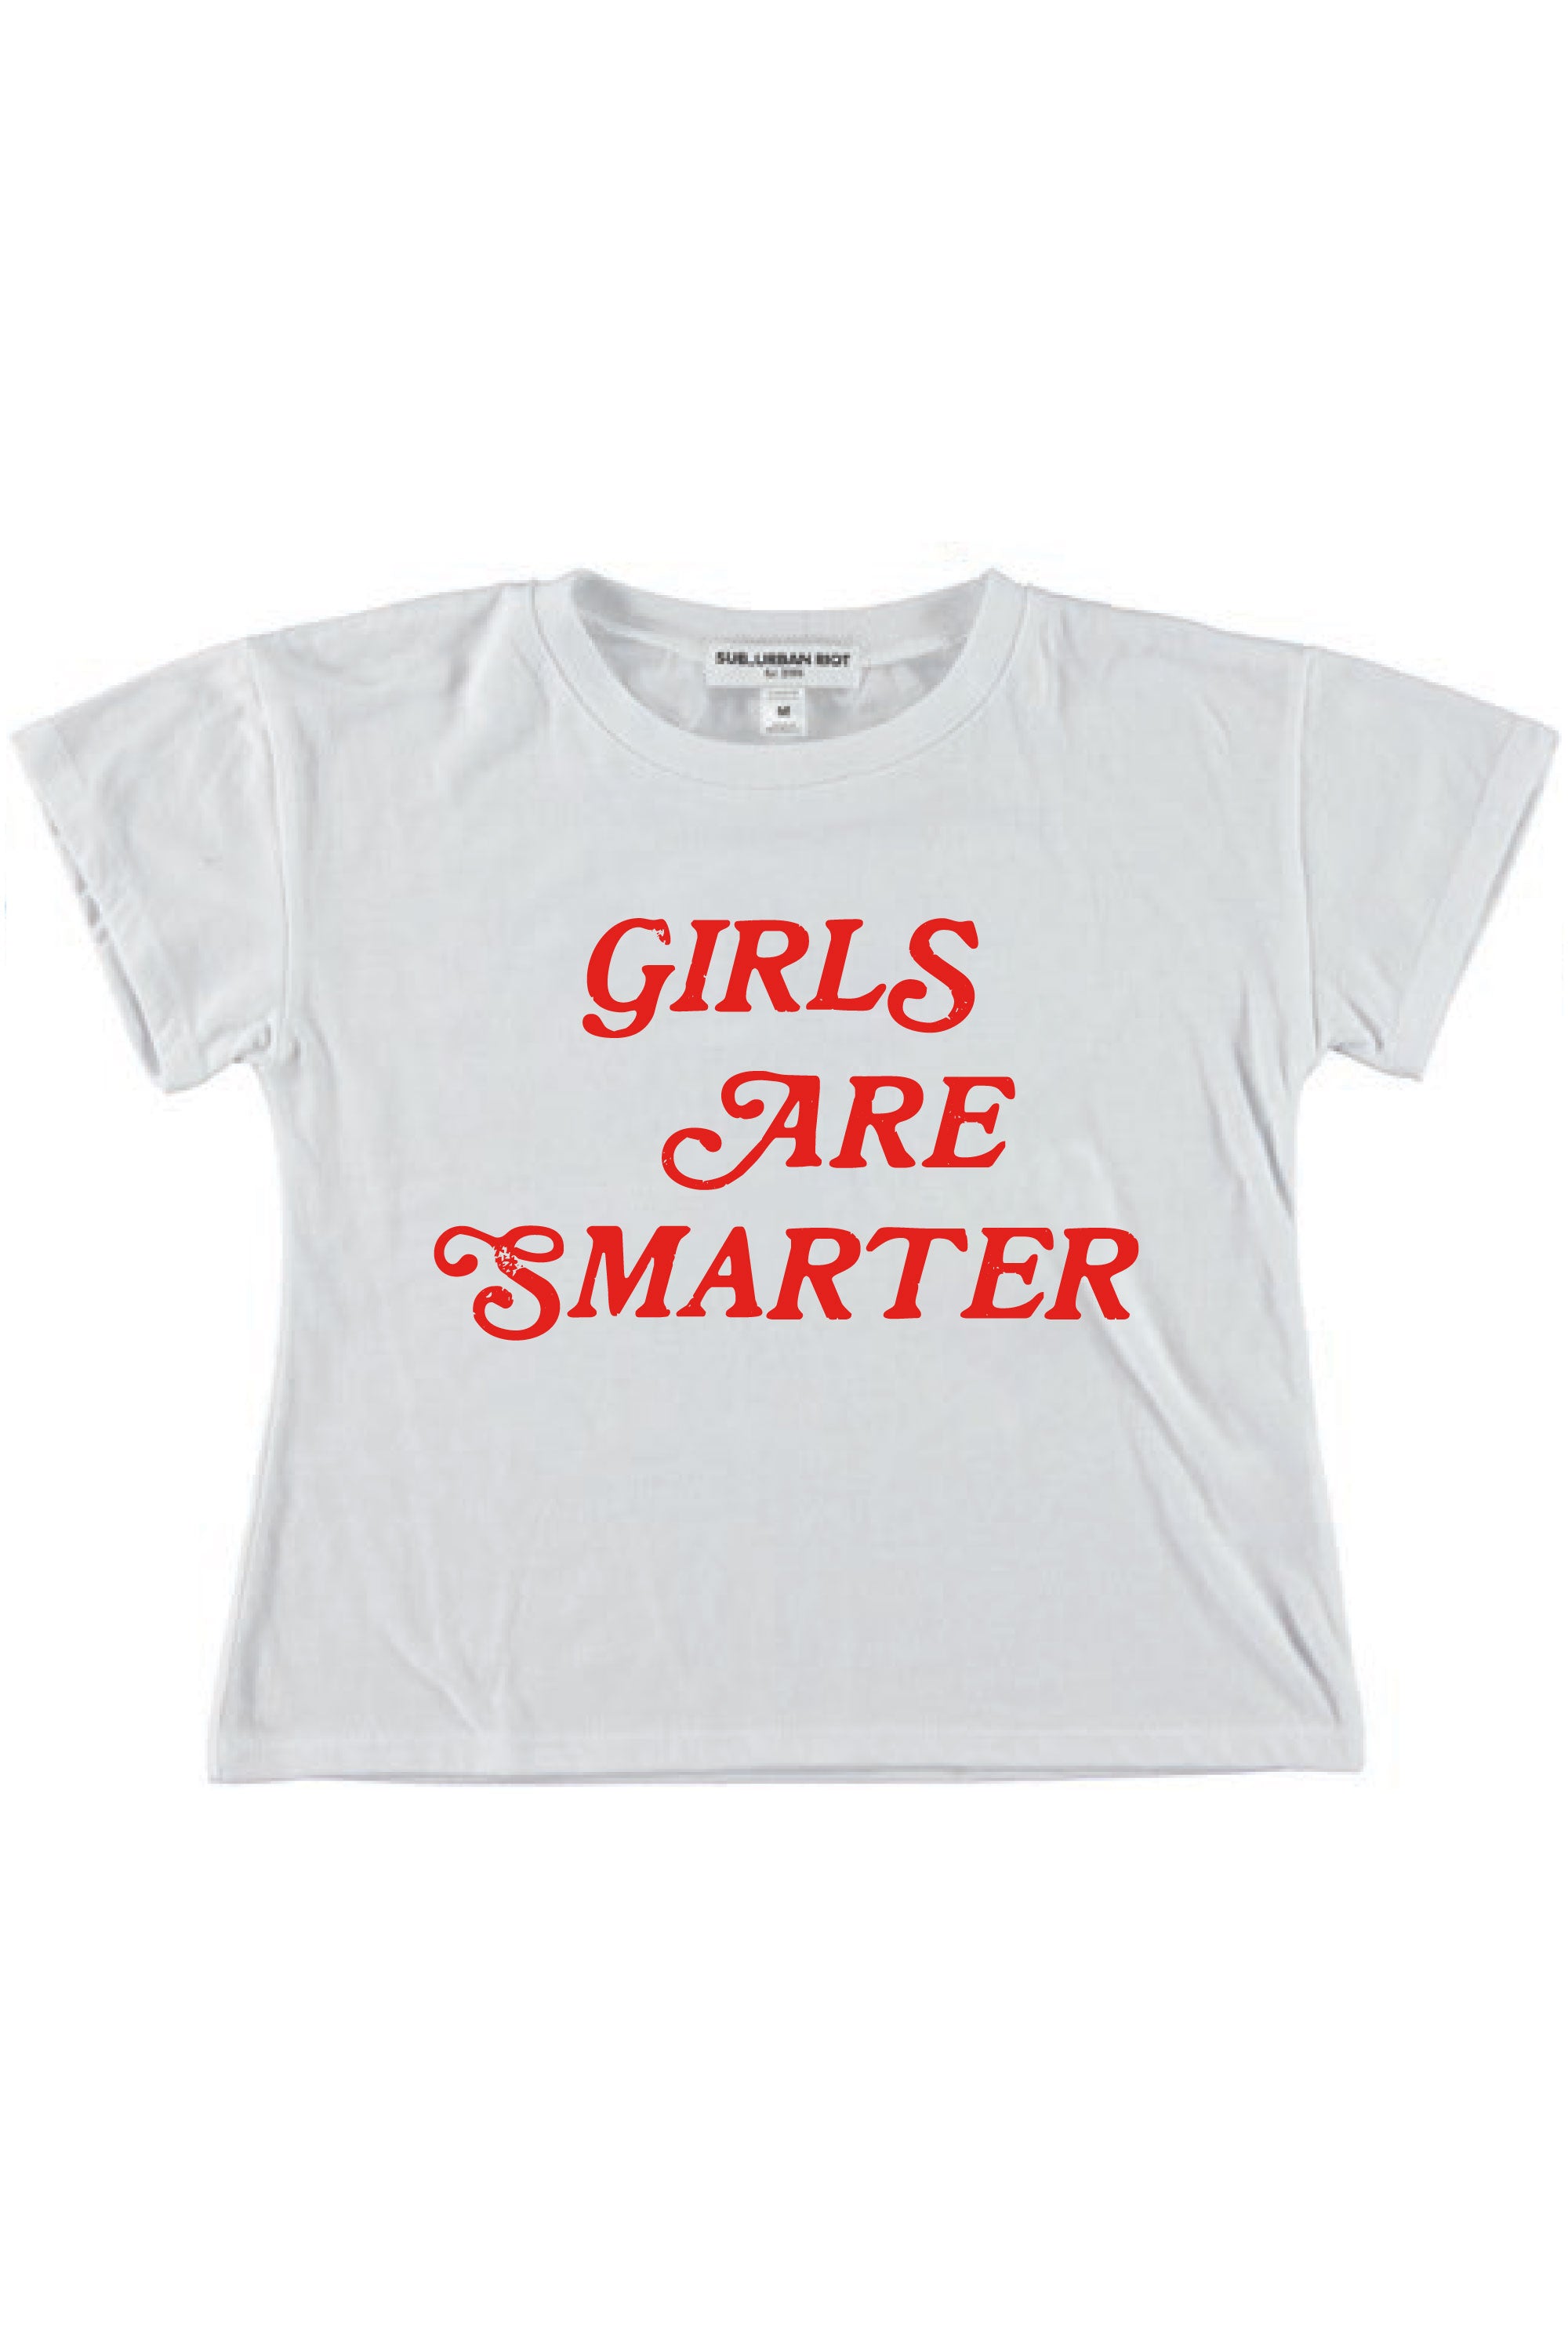 GIRLS ARE SMARTER YOUTH SIZE CROP TEE